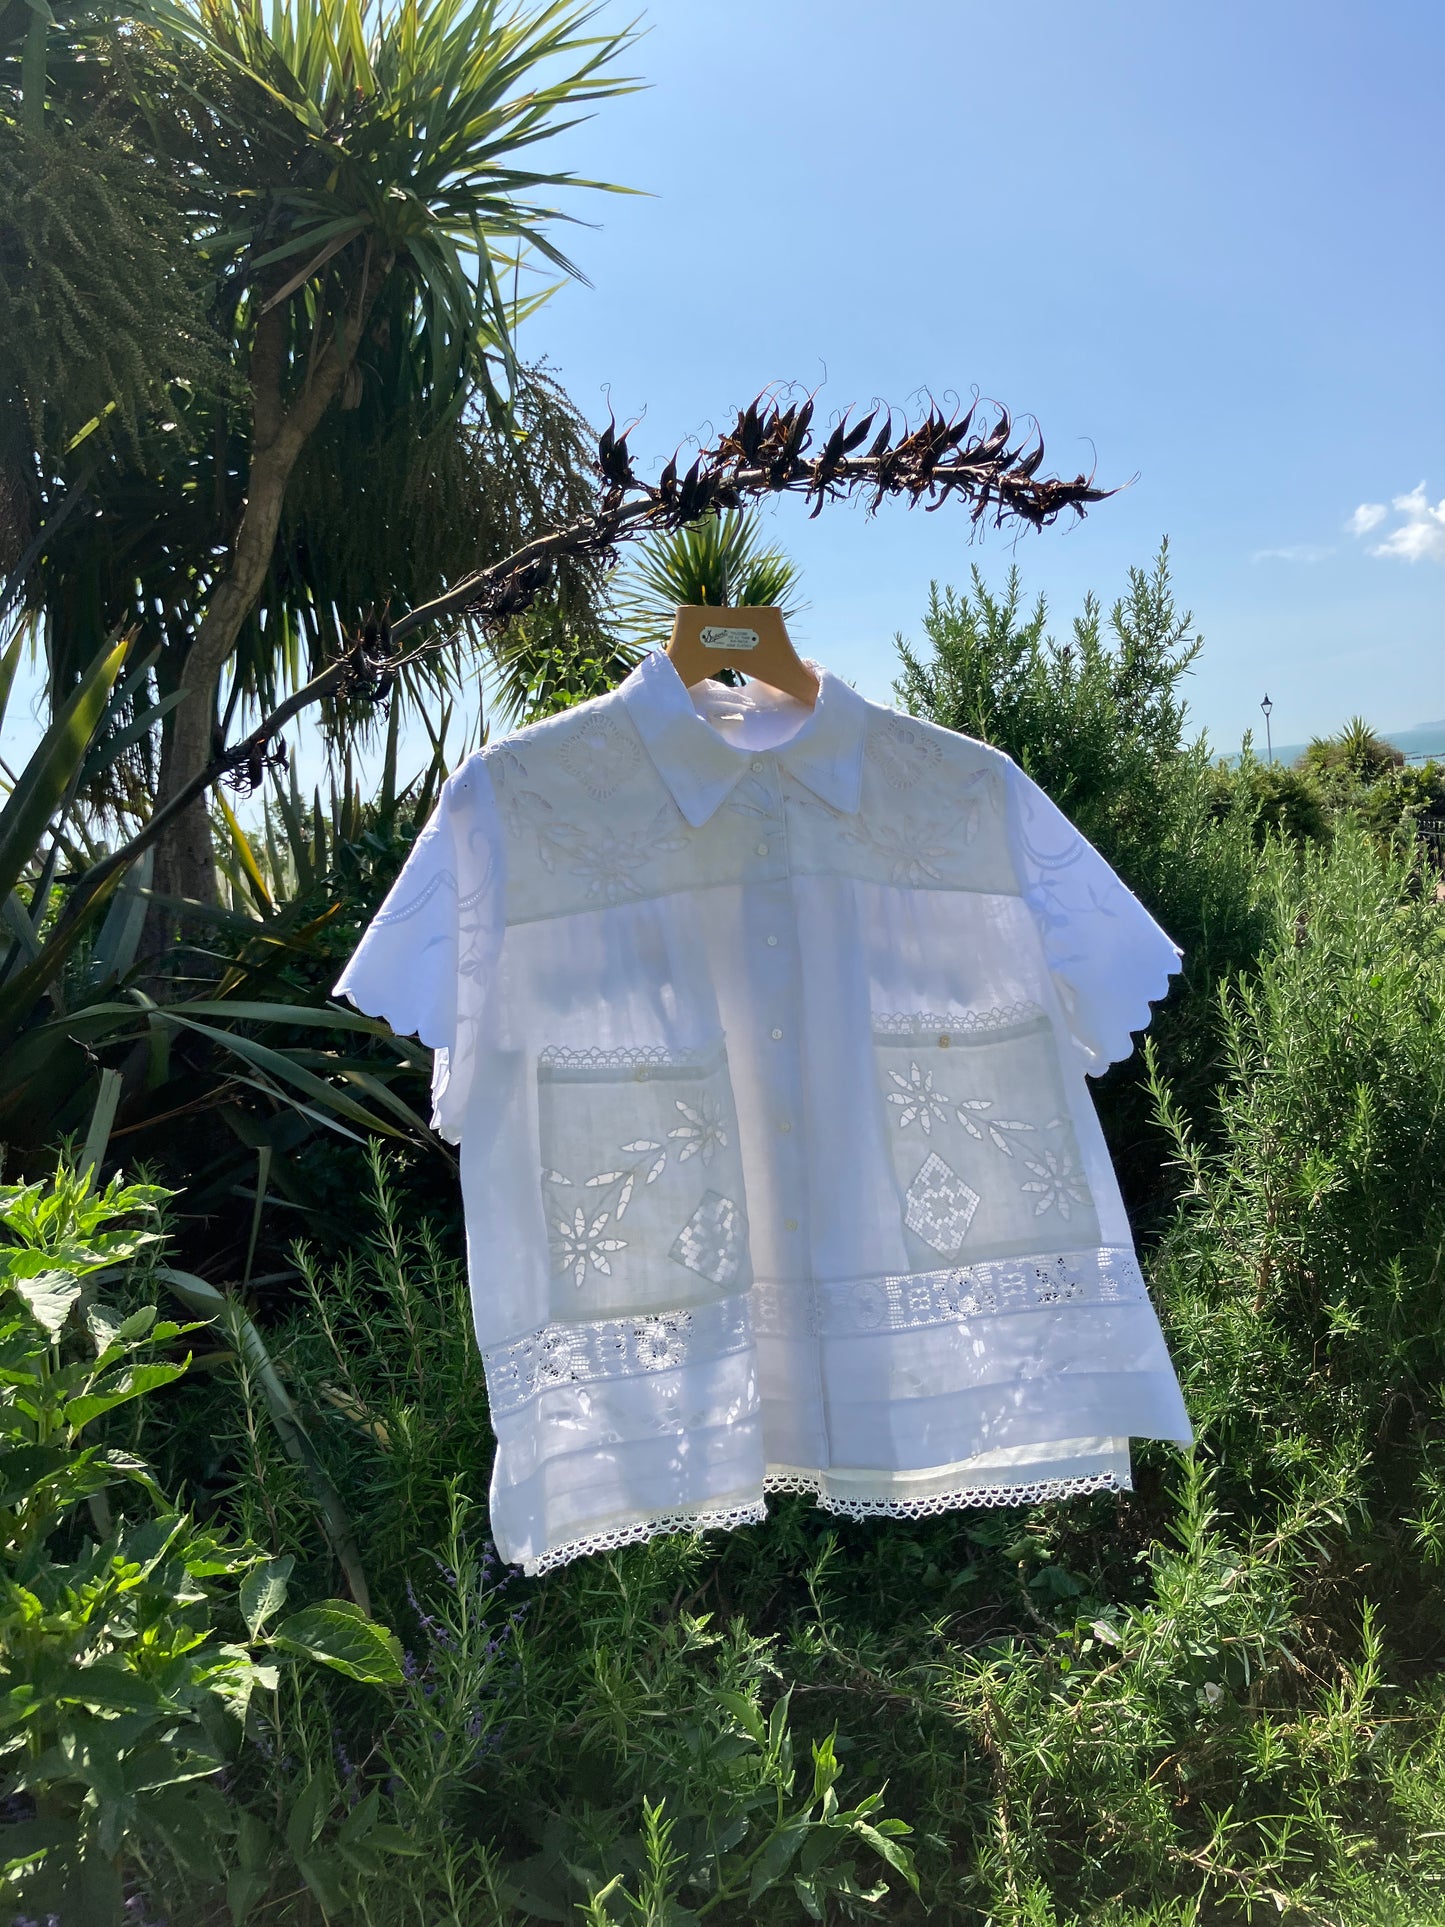 Short-sleeved white swingy shirt made from vintage cutwork linen and cotton cutwork table and tray cloths.